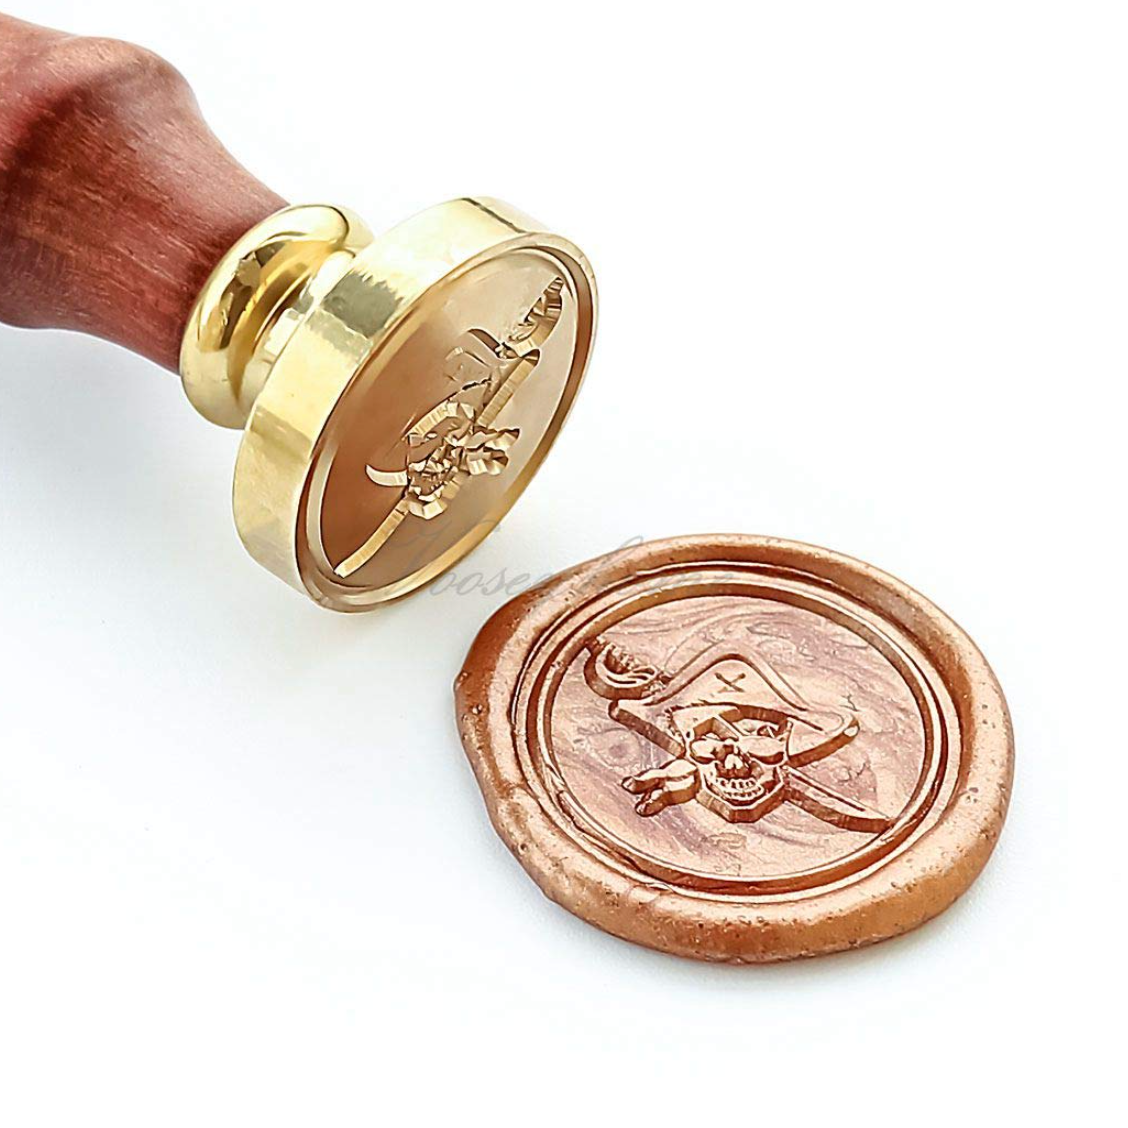 Wax Seal Stamp - Pirate